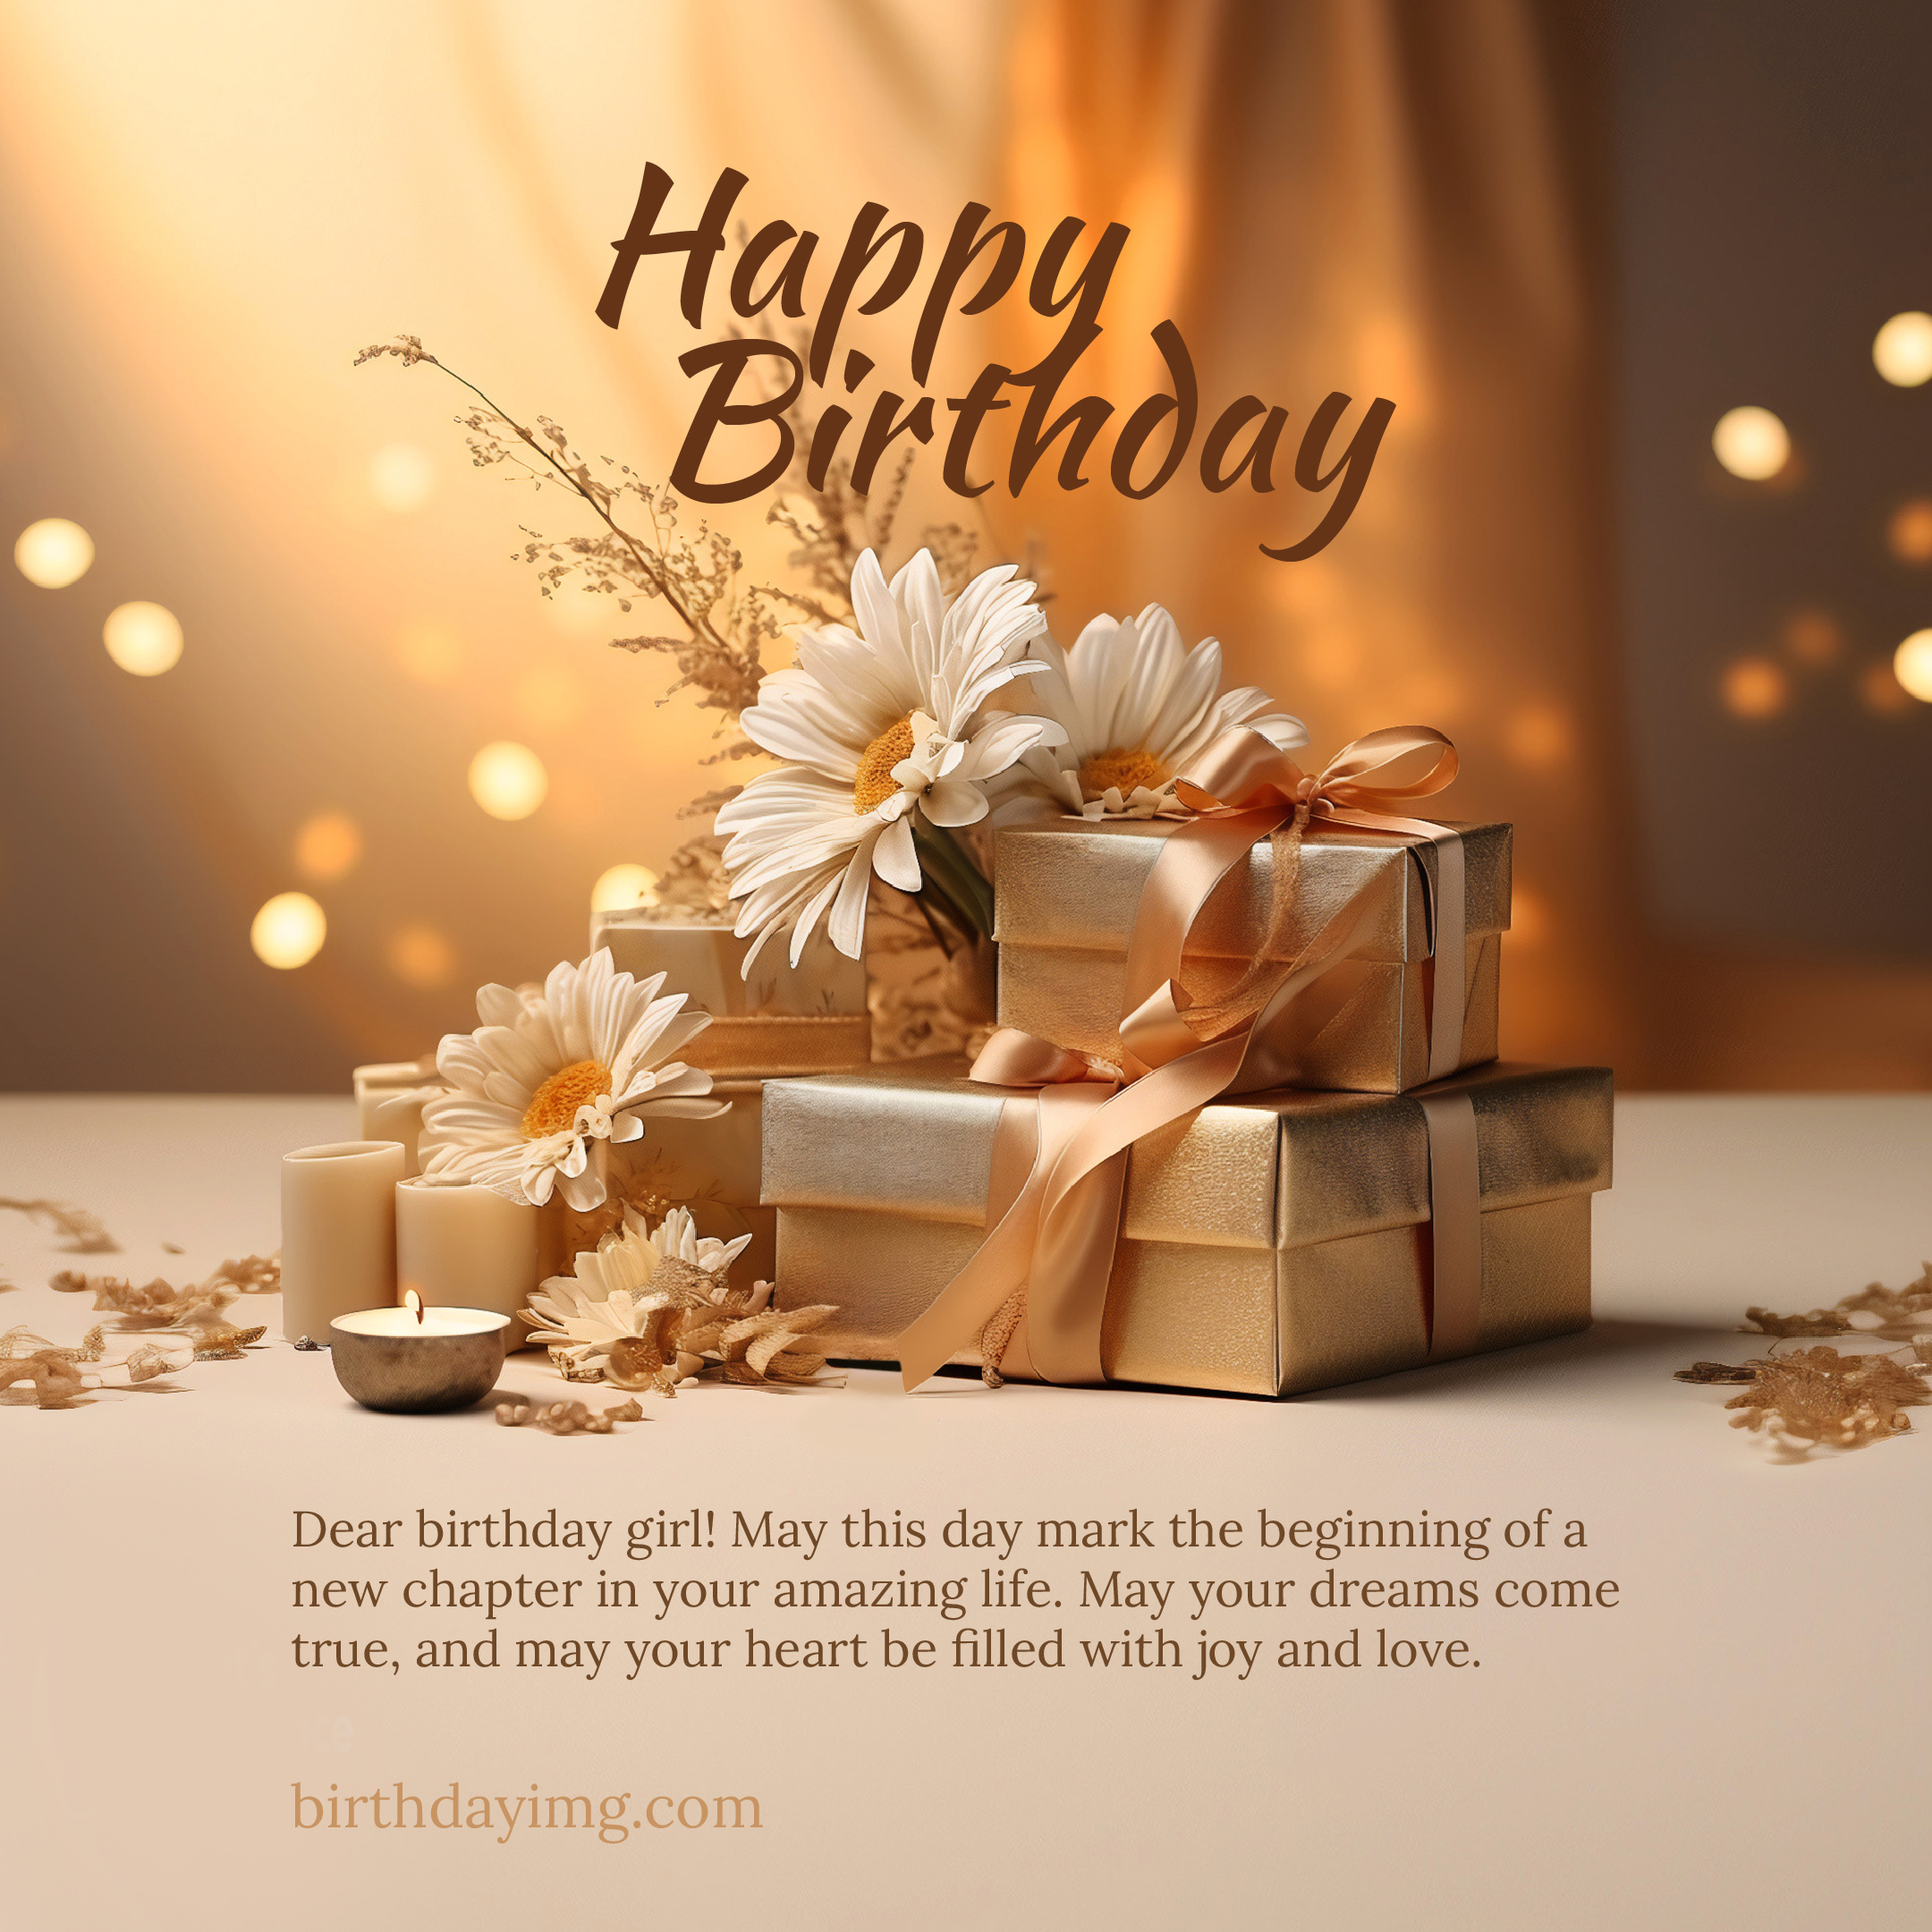 Free Happy Birthday Wishes and Images for Her (Woman) - birthdayimg.com